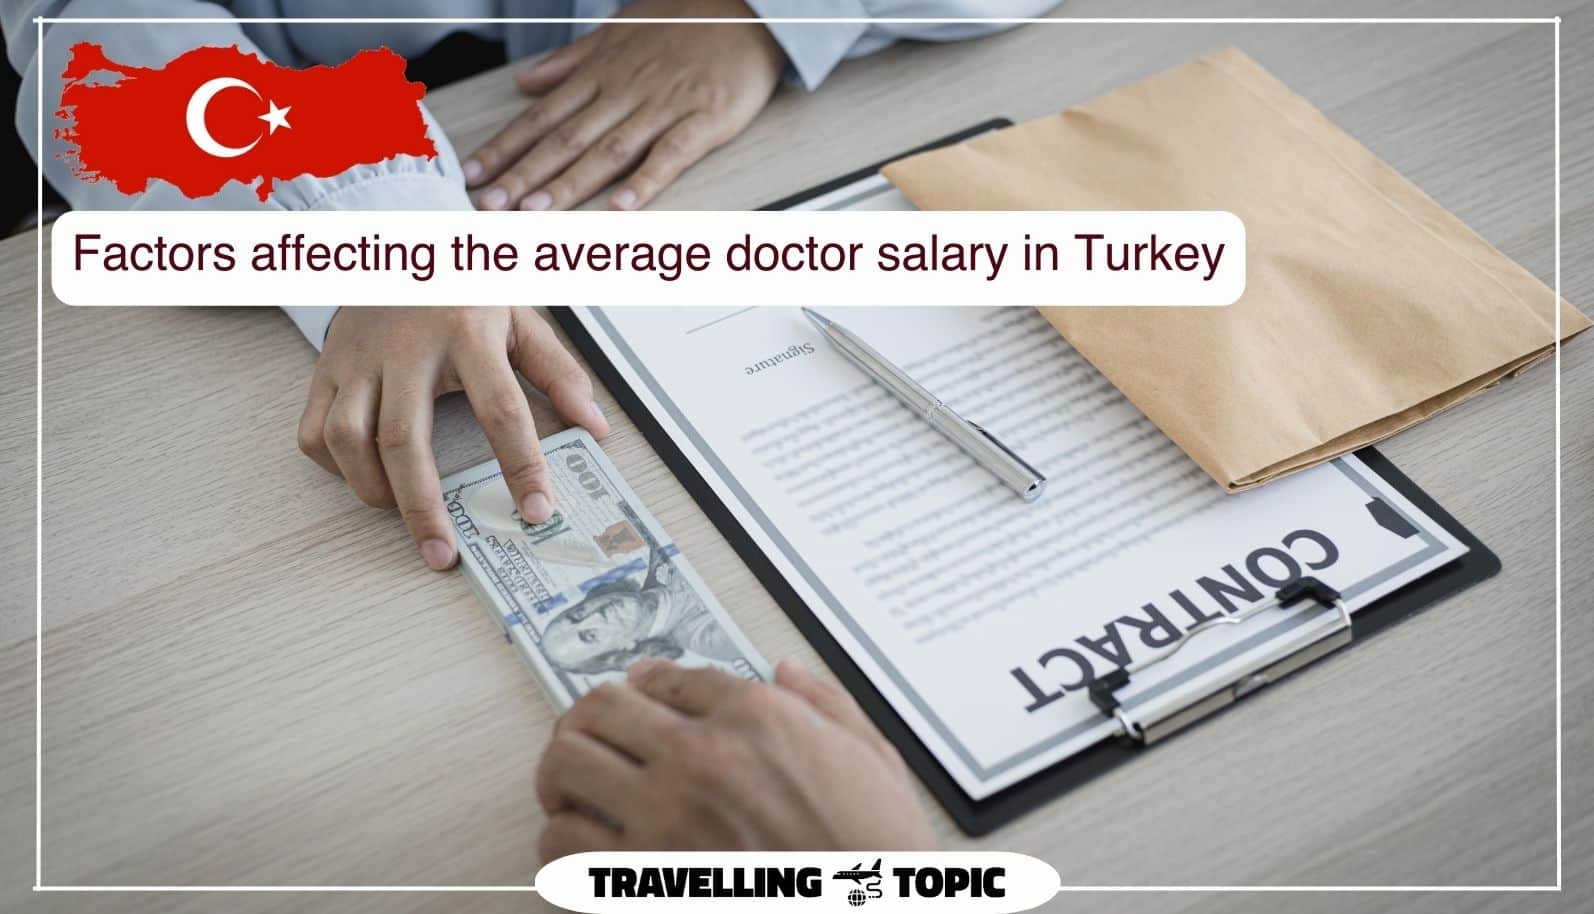 Factors affecting the average doctor salary in Turkey